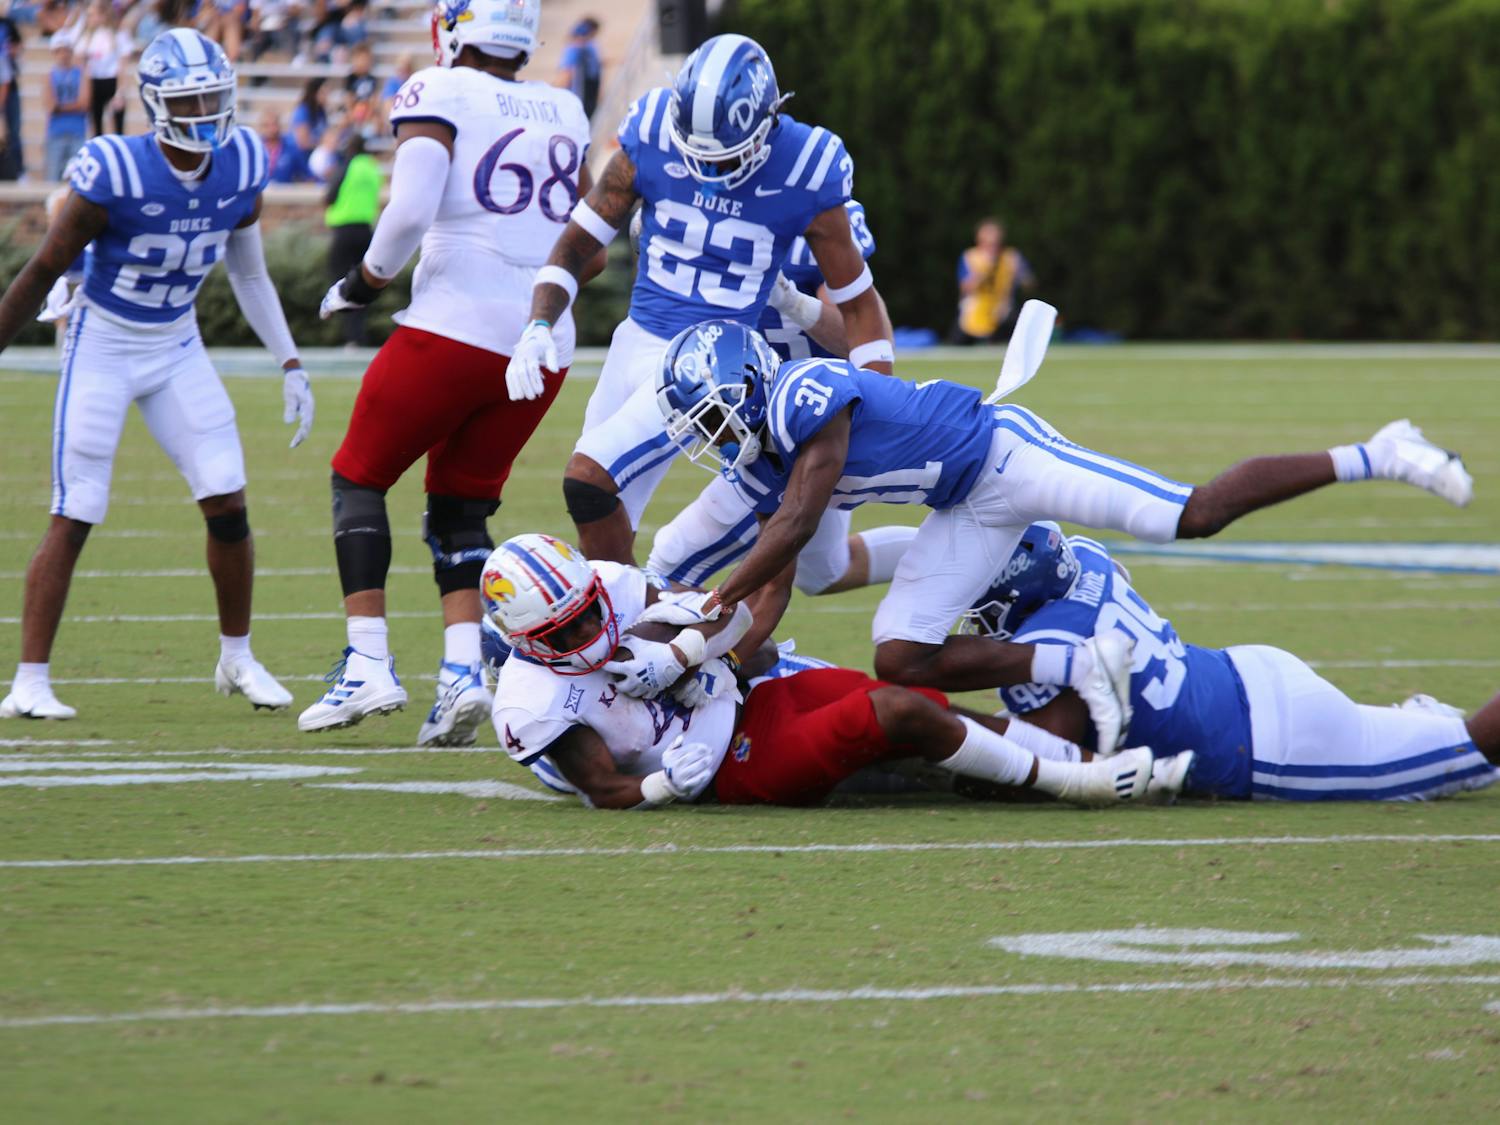 Duke's defense will play a vital role Saturday against Wake Forest.